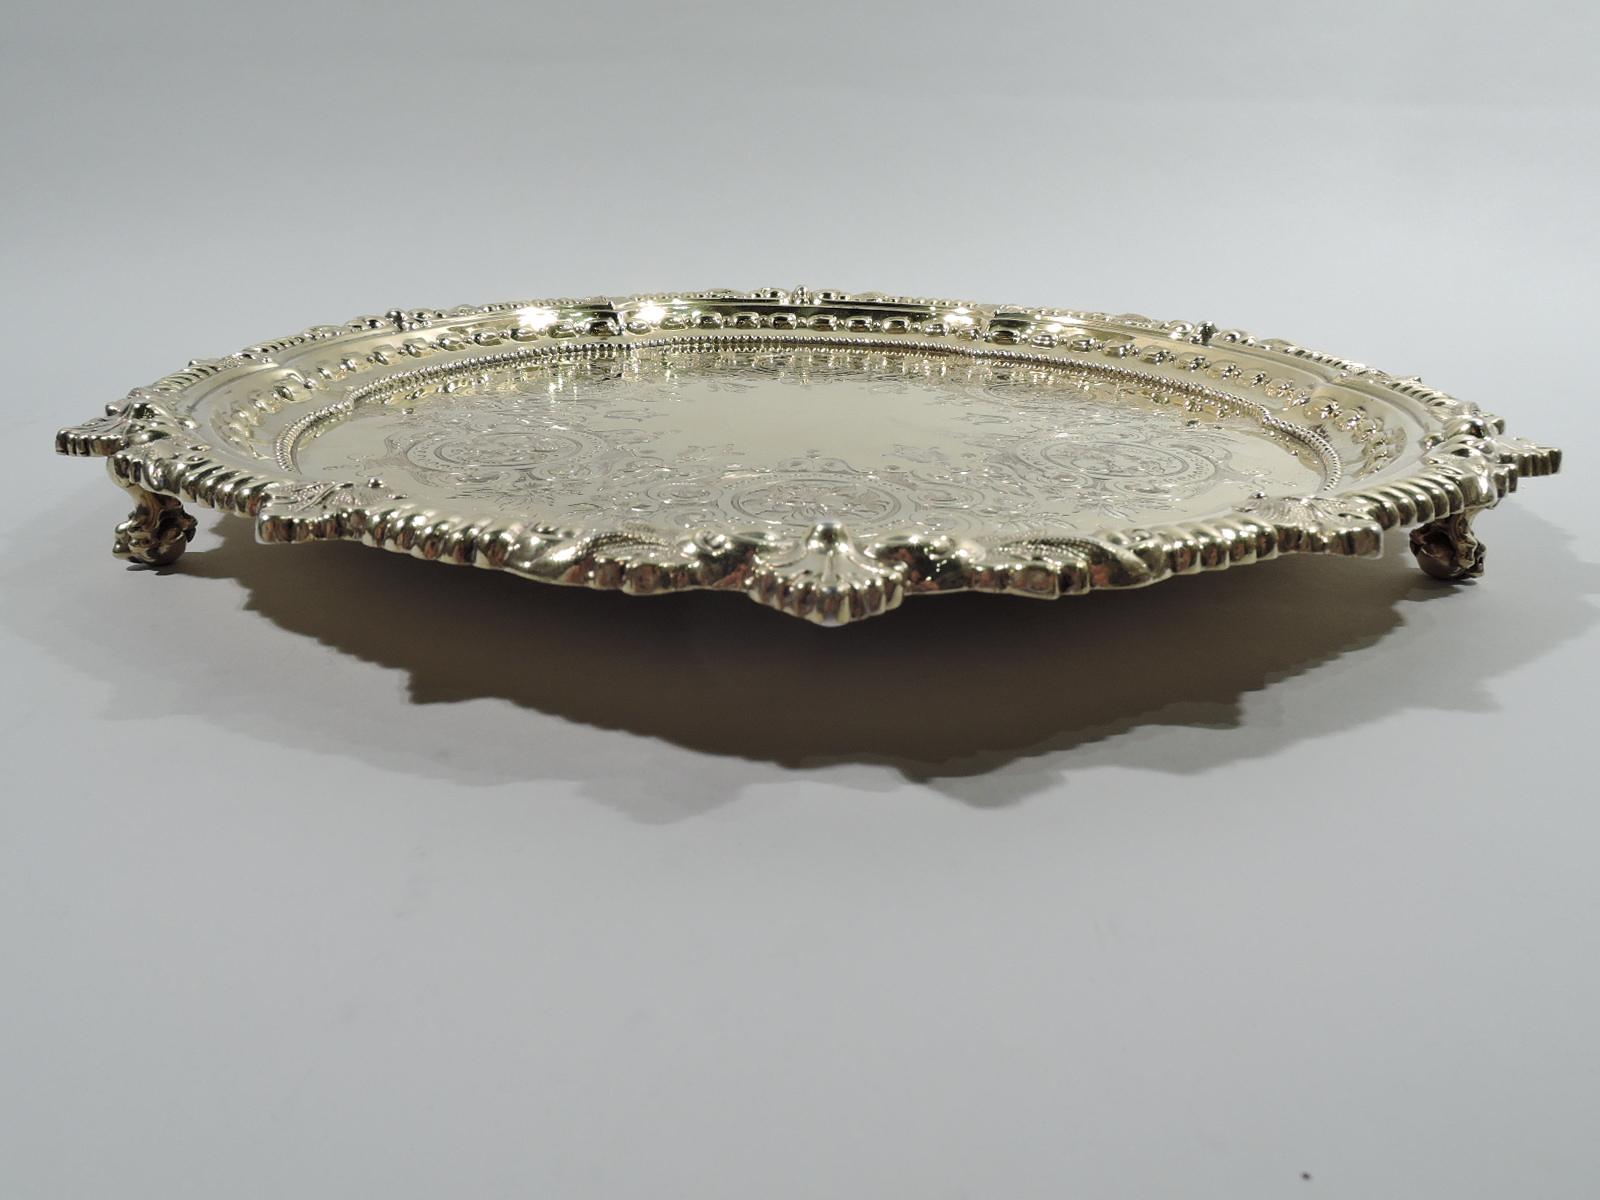 Sumptuous Regency Revival gilt sterling silver salver. Made by Howard & Co. in New York in 1900. Round and lobed well with vacant center and leaf-and-flower rondel border. Applied beading and embossed leaf-and-berry. Rim gadrooned and interspersed